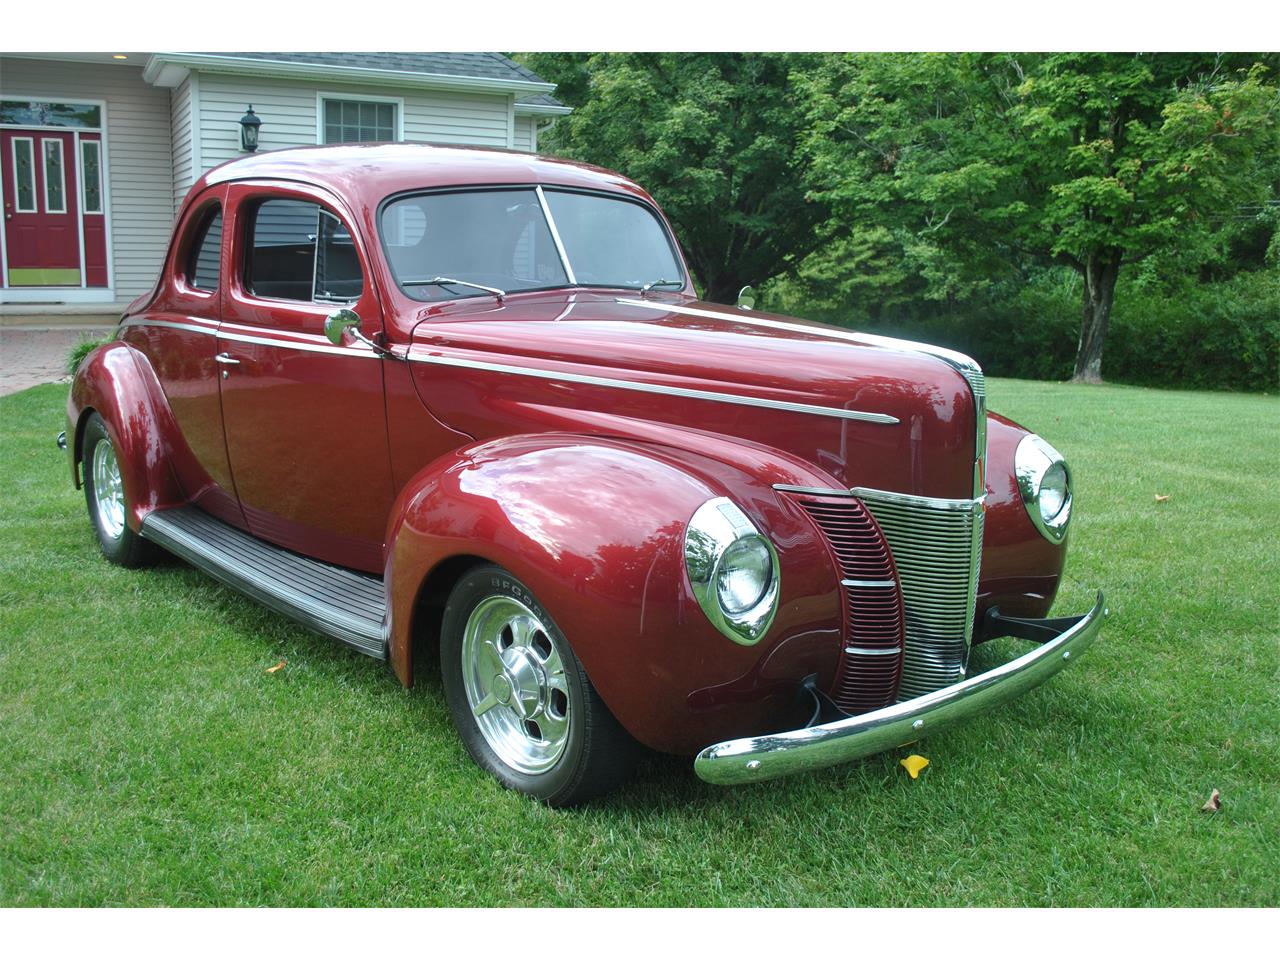 For Sale: 1940 Ford Deluxe Coupe in Milford, New Jersey.